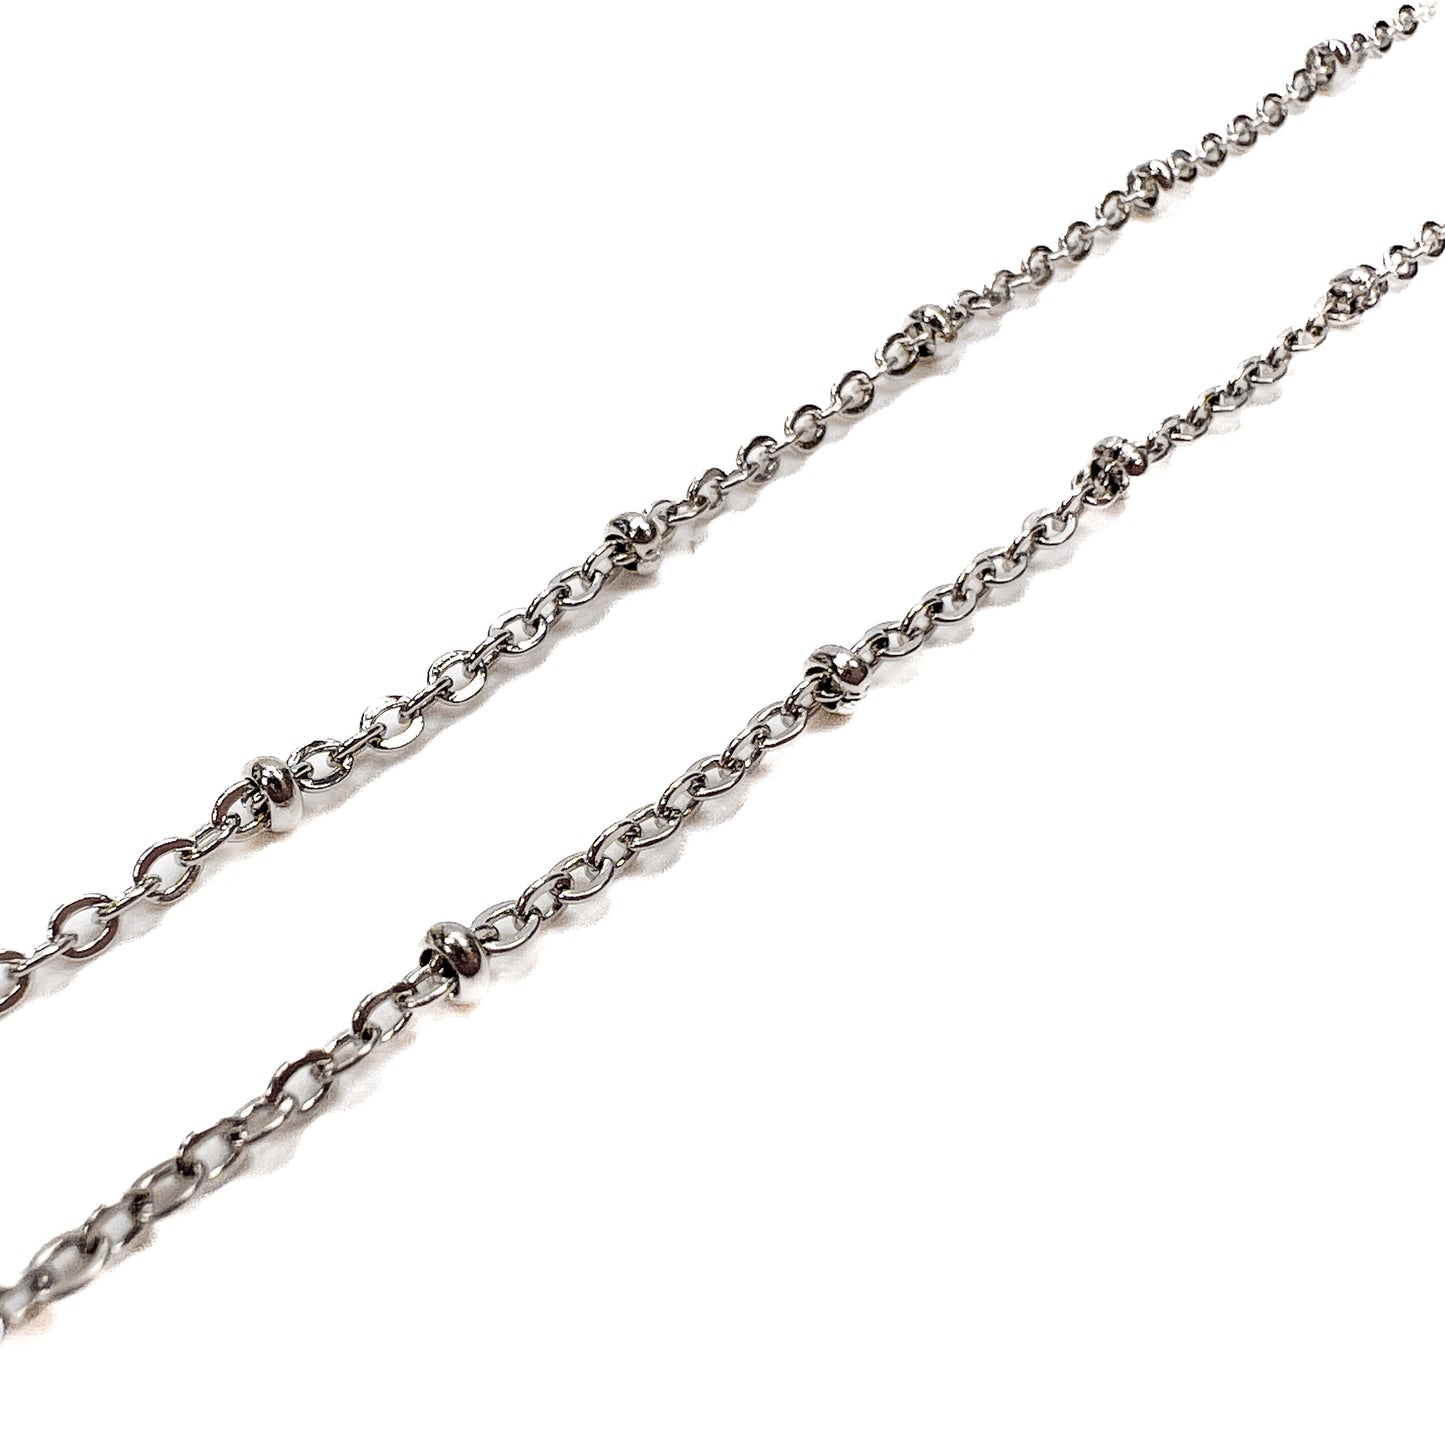 20" Satellite Necklace Chain (Stainless Steel)